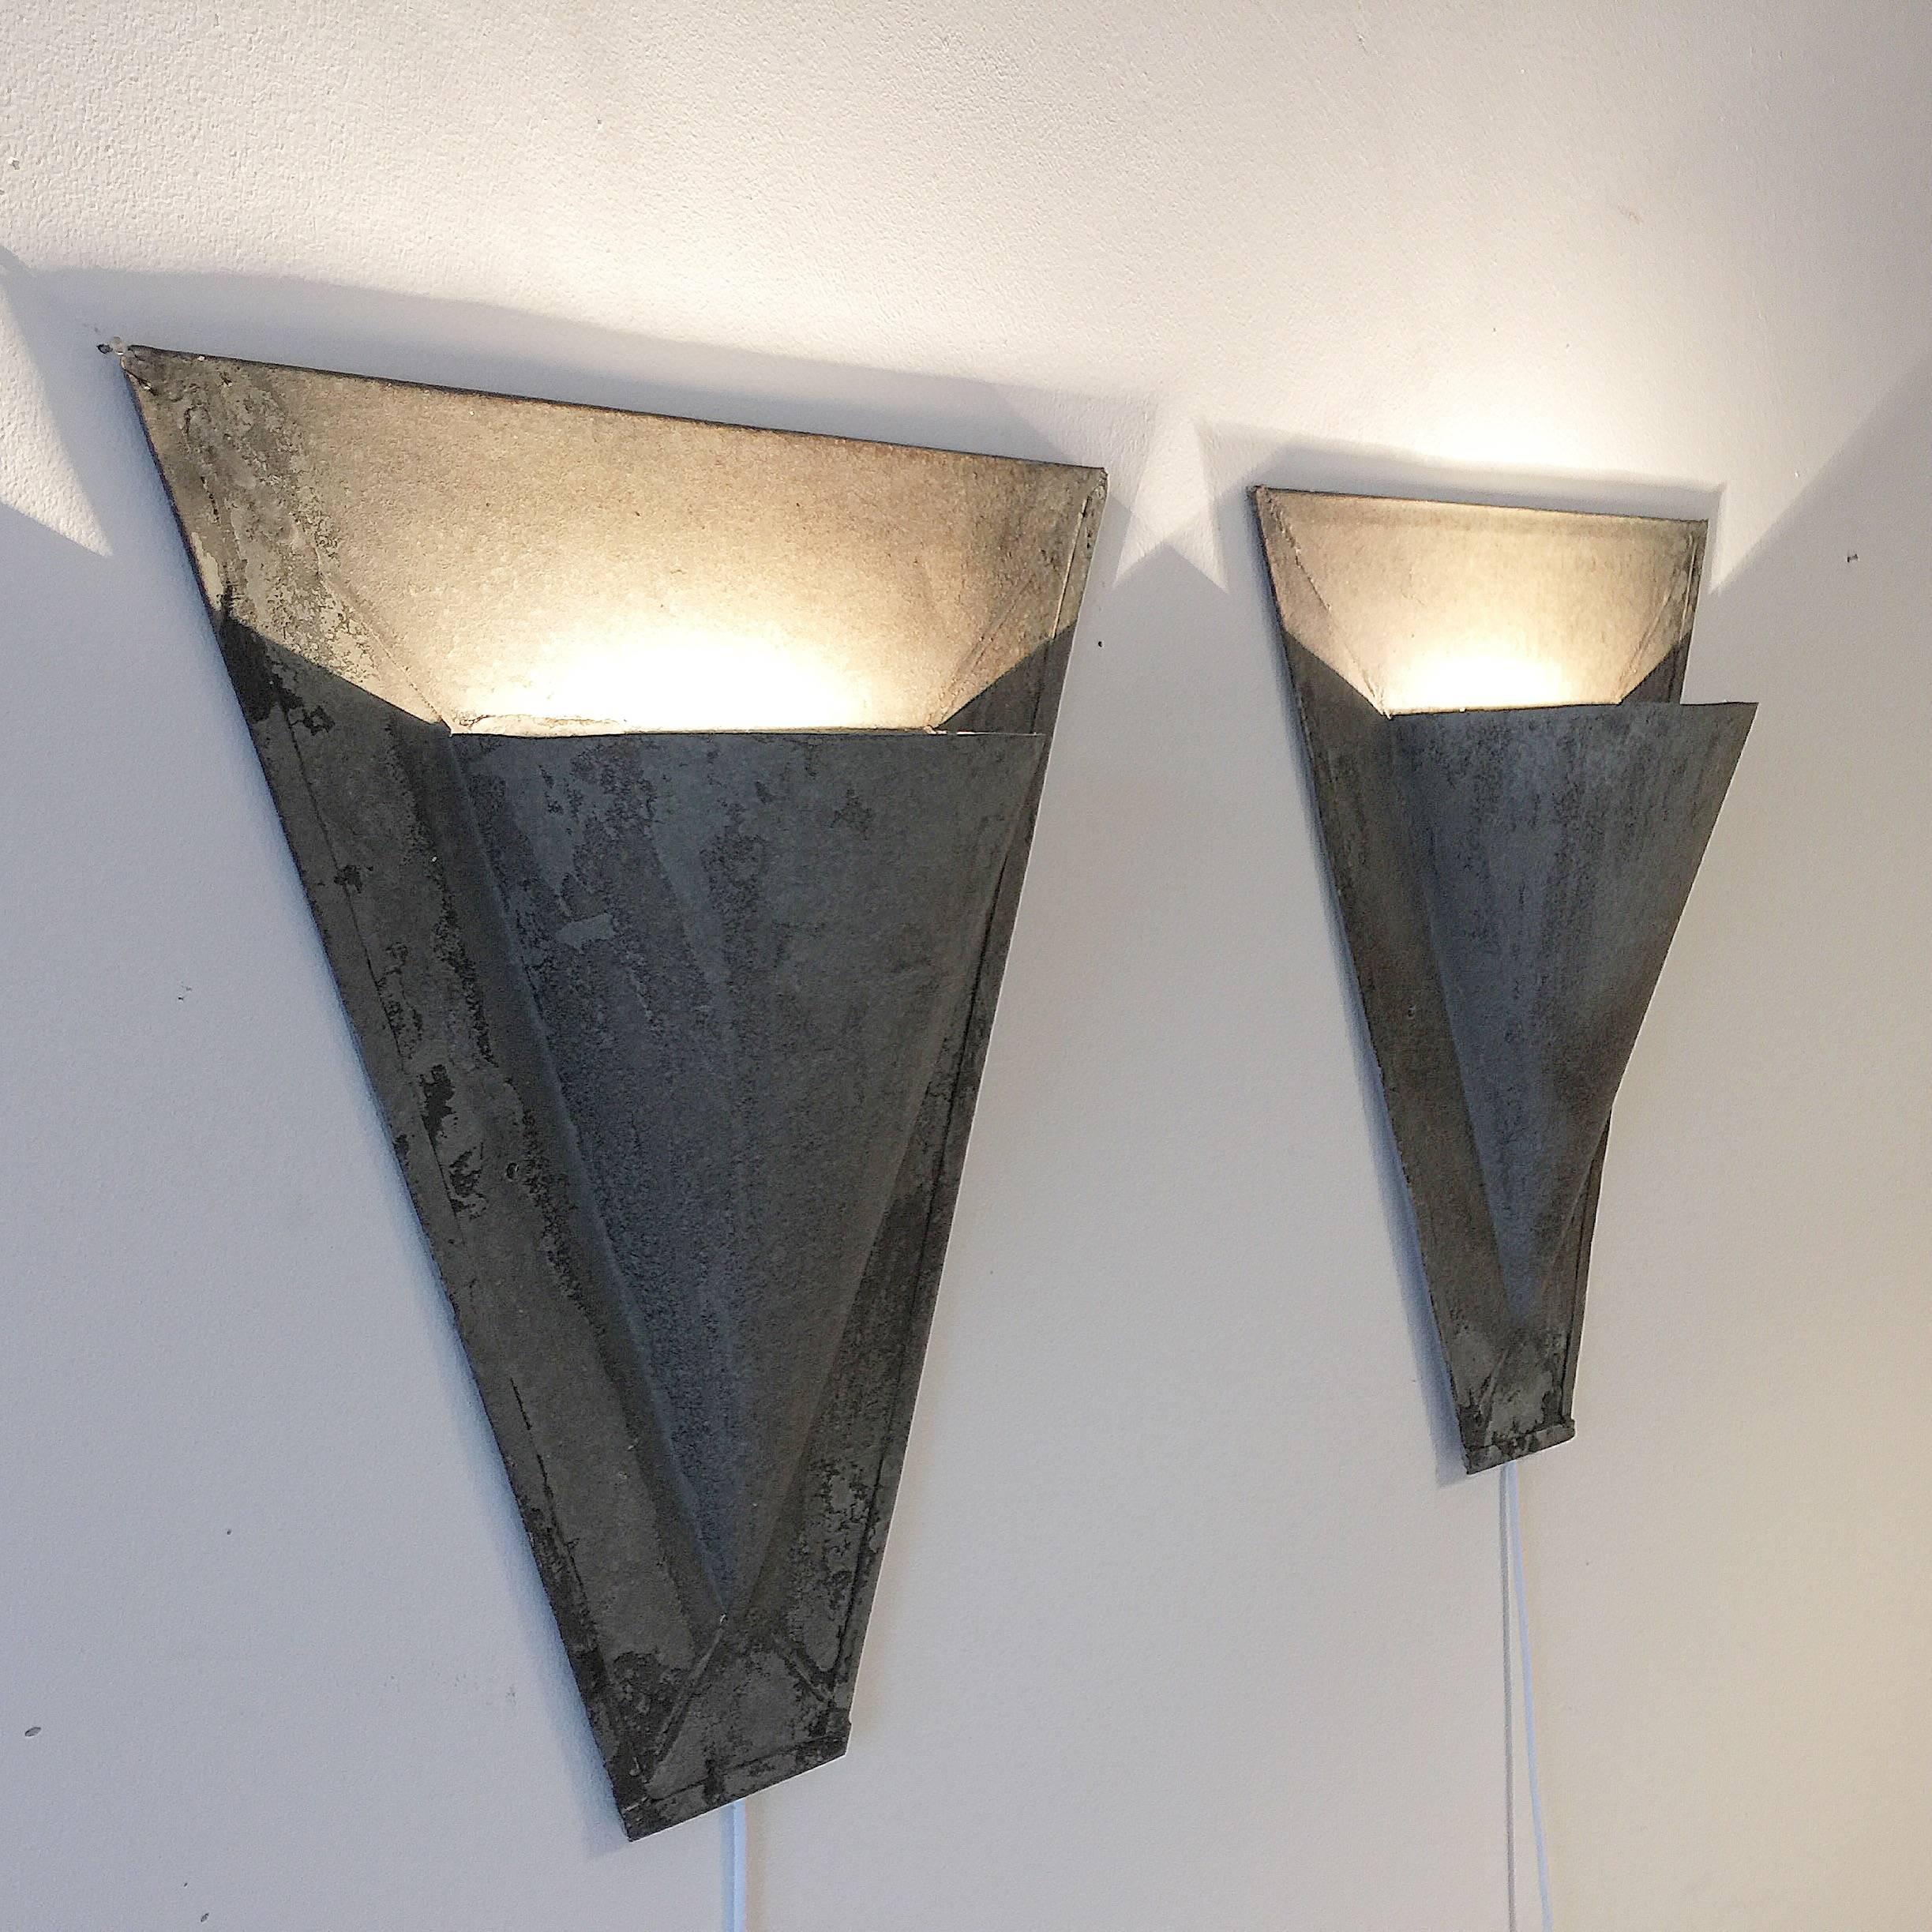 19th century zinc galvanized architectural building elements converted into a stunning pair of up lighters. Please note these lights are wired for the UK only and will require conversion to your countries specific standards.